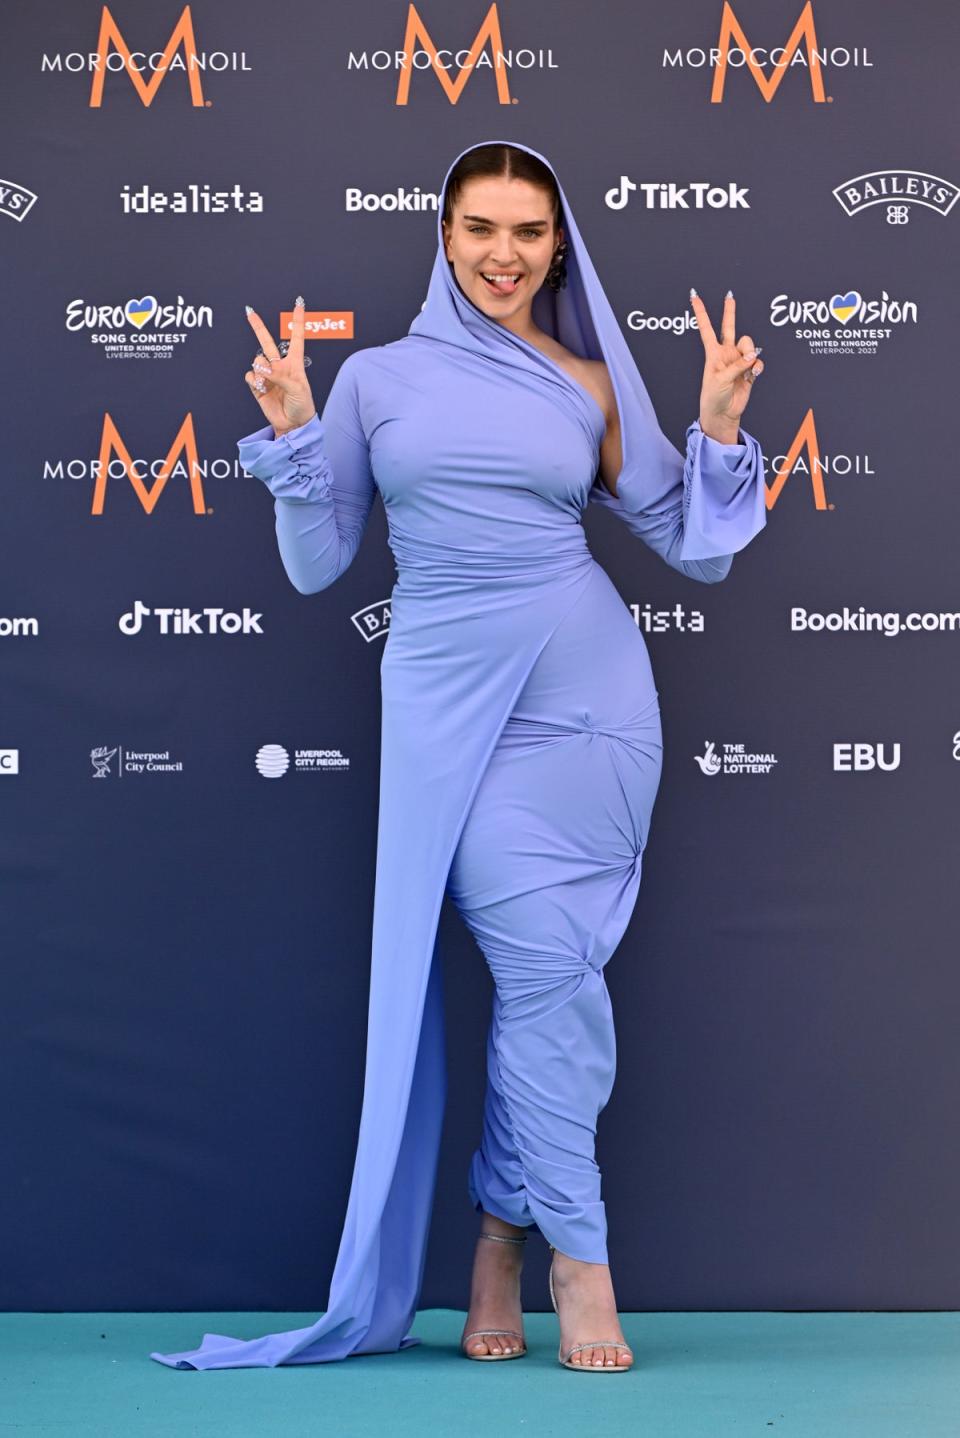 Mae Muller, representative for The United Kingdom, attending the Eurovision Song Contest 2023 (Photo by Anthony Devlin/Getty Images)